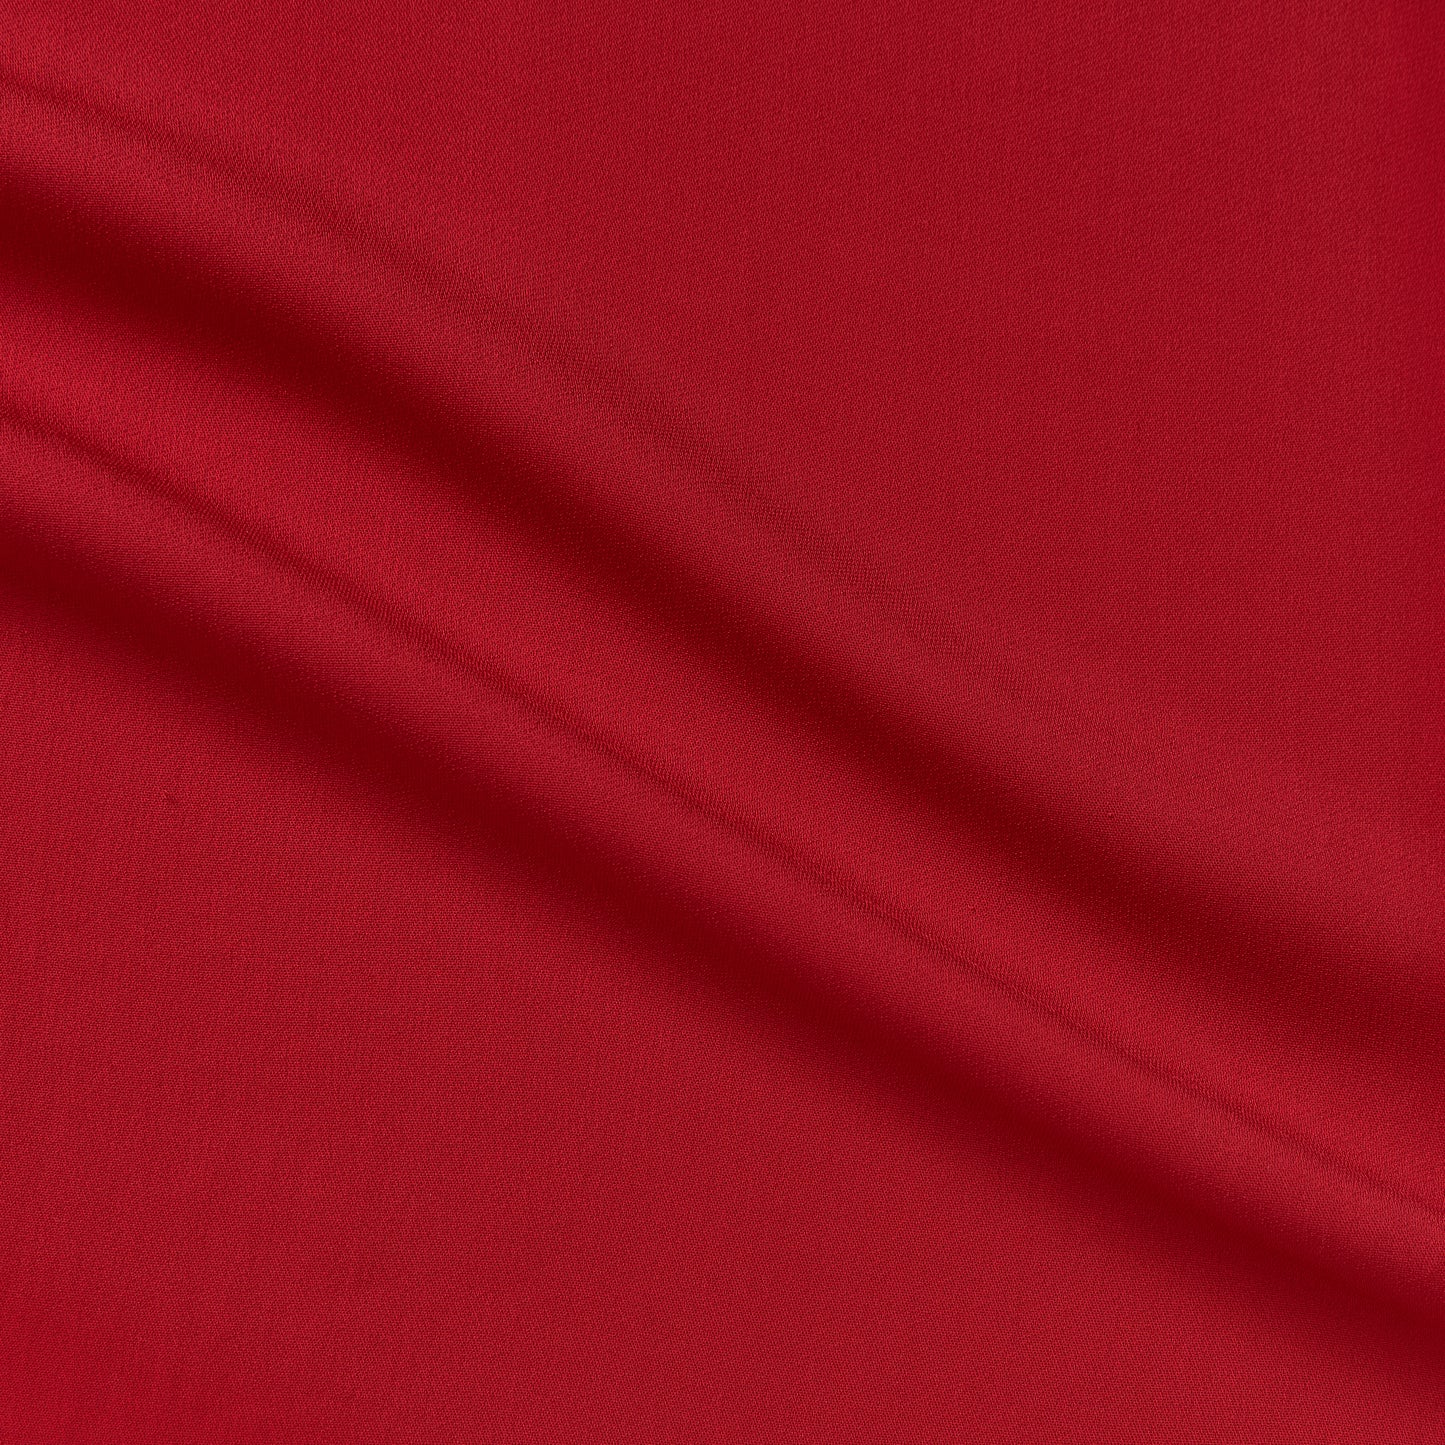 imagine presenting the red color version of a stretch mid weight viscose and lycra with a natural silk like sheen and good drape